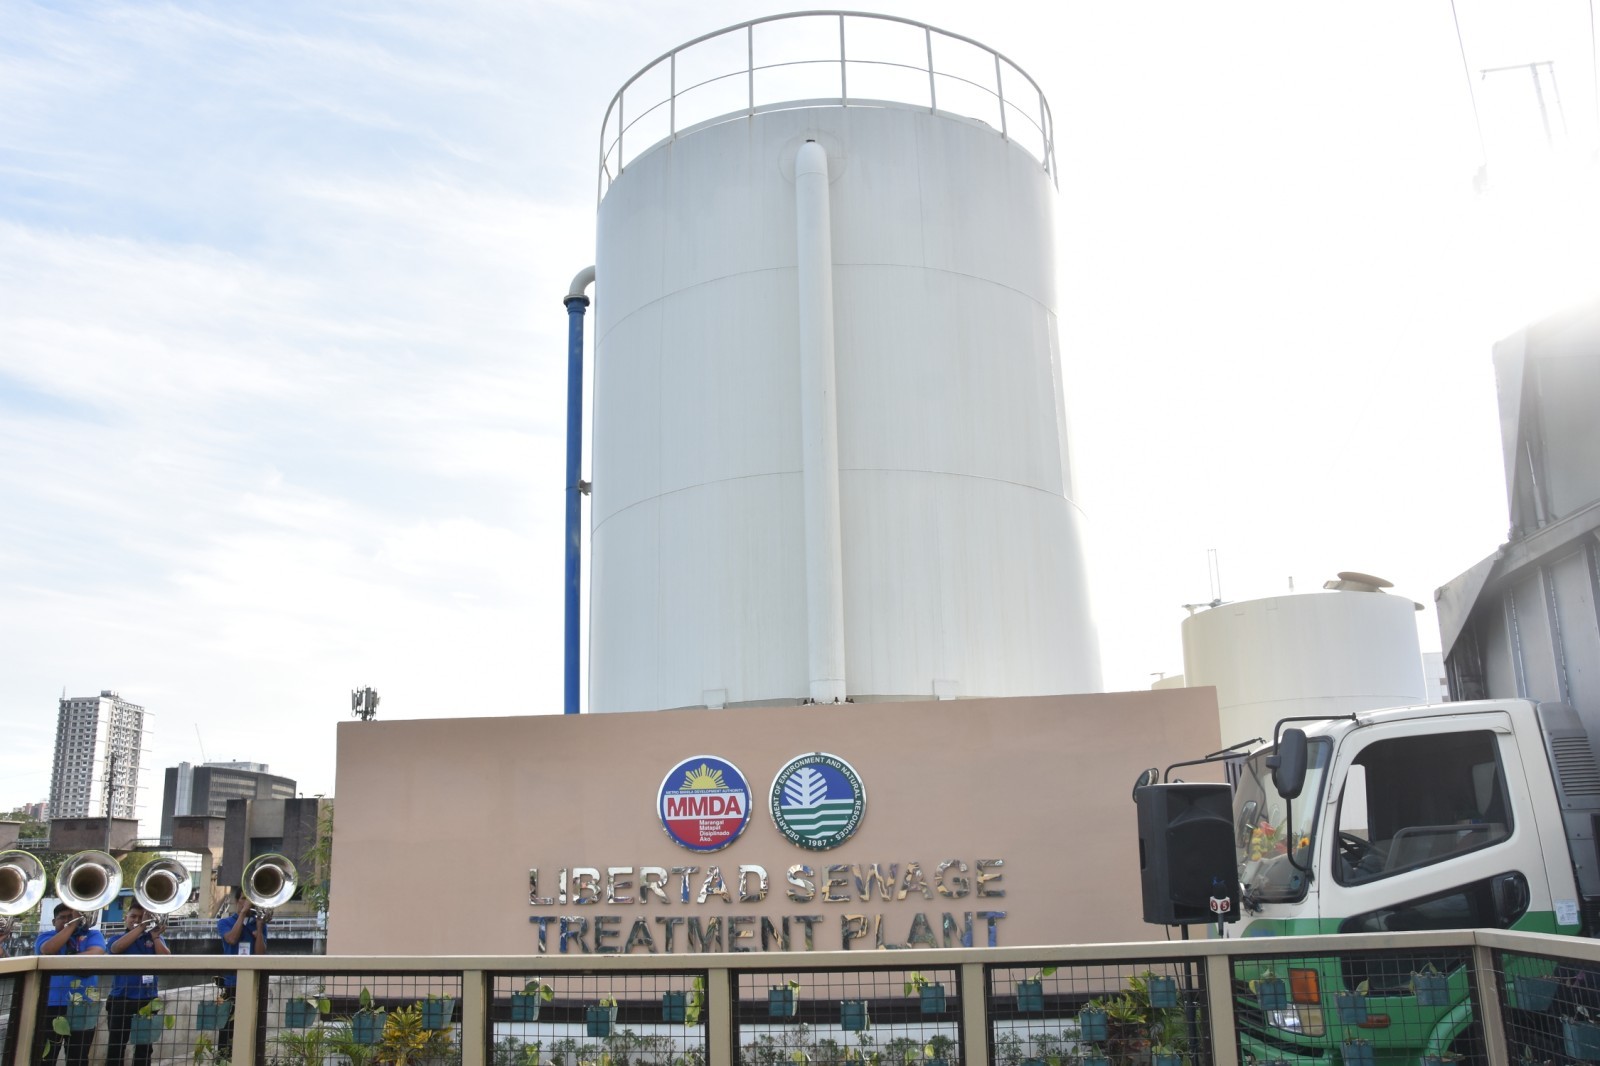 A sewage treatment plant in Pasay City was inaugurated on Tuesday in a bid to improve the water quality of Manila Bay.